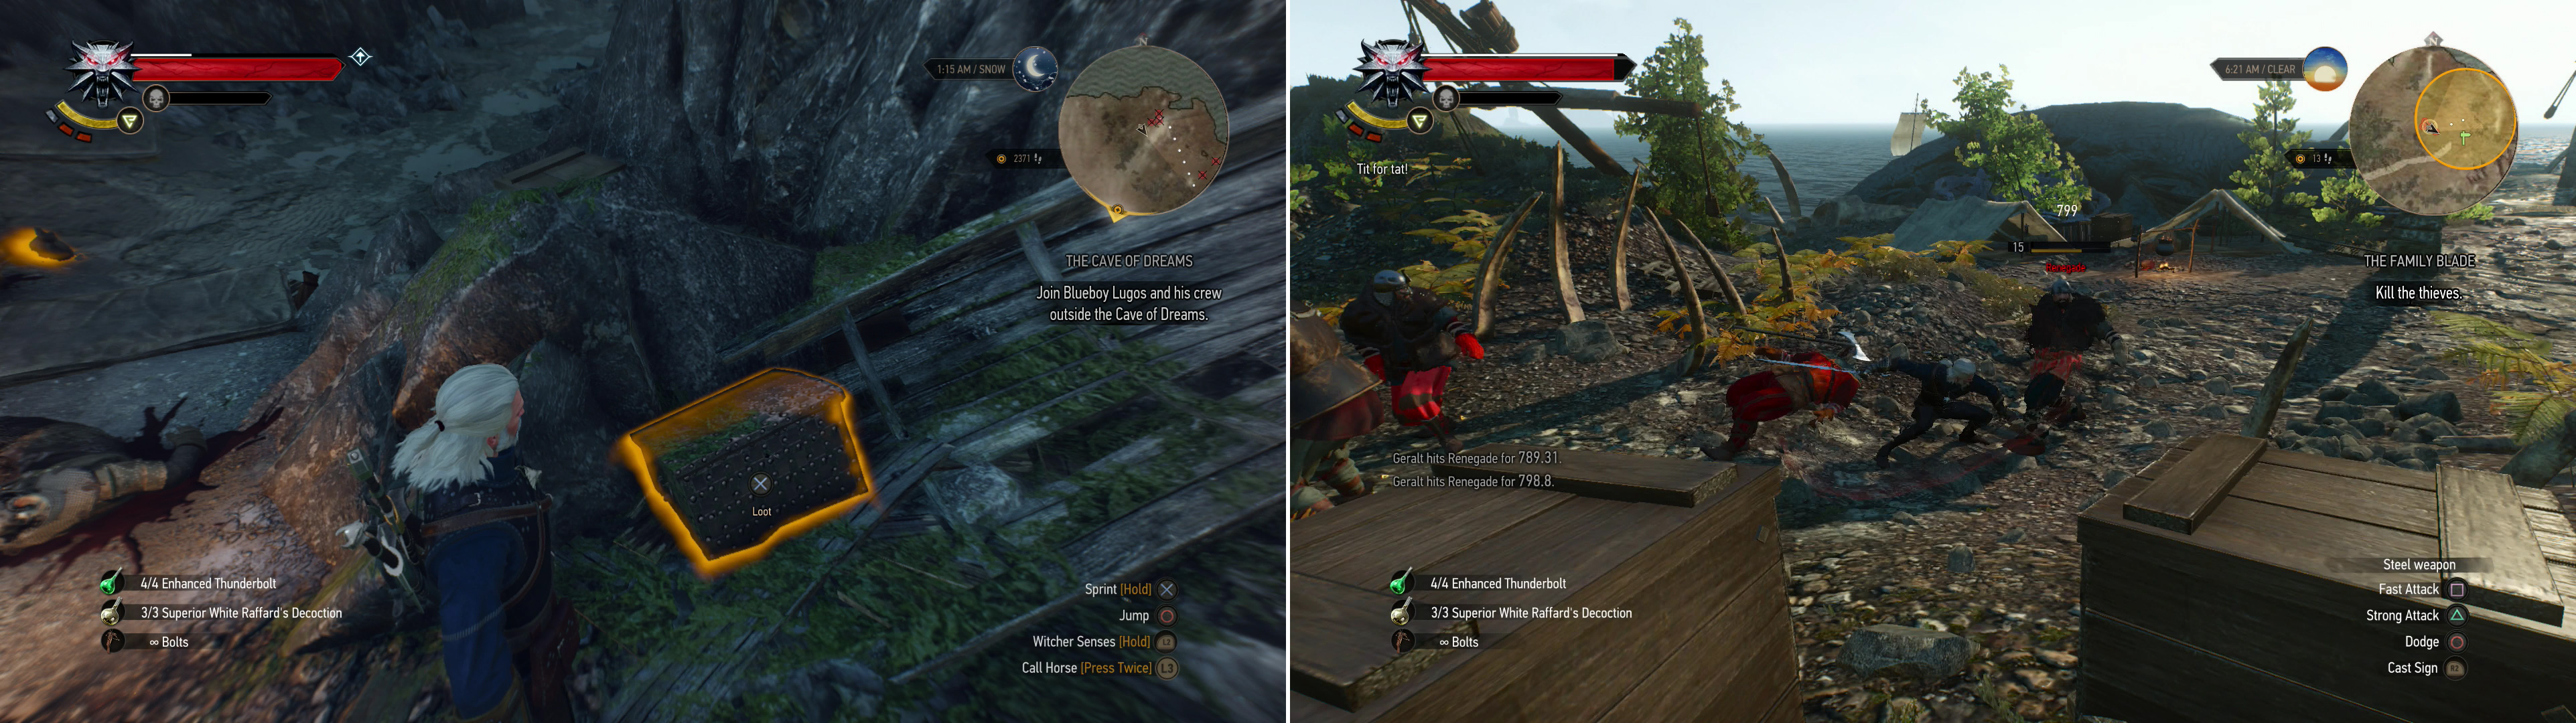 Kill the Bandits along the coast north of the "Giant's Coast" signpost and loot a chest to find a set of Superior Griffin Diagrams (left). Kill the Bandits at the Whale Graveyard to finally claim the sword "Kuliu" (right).